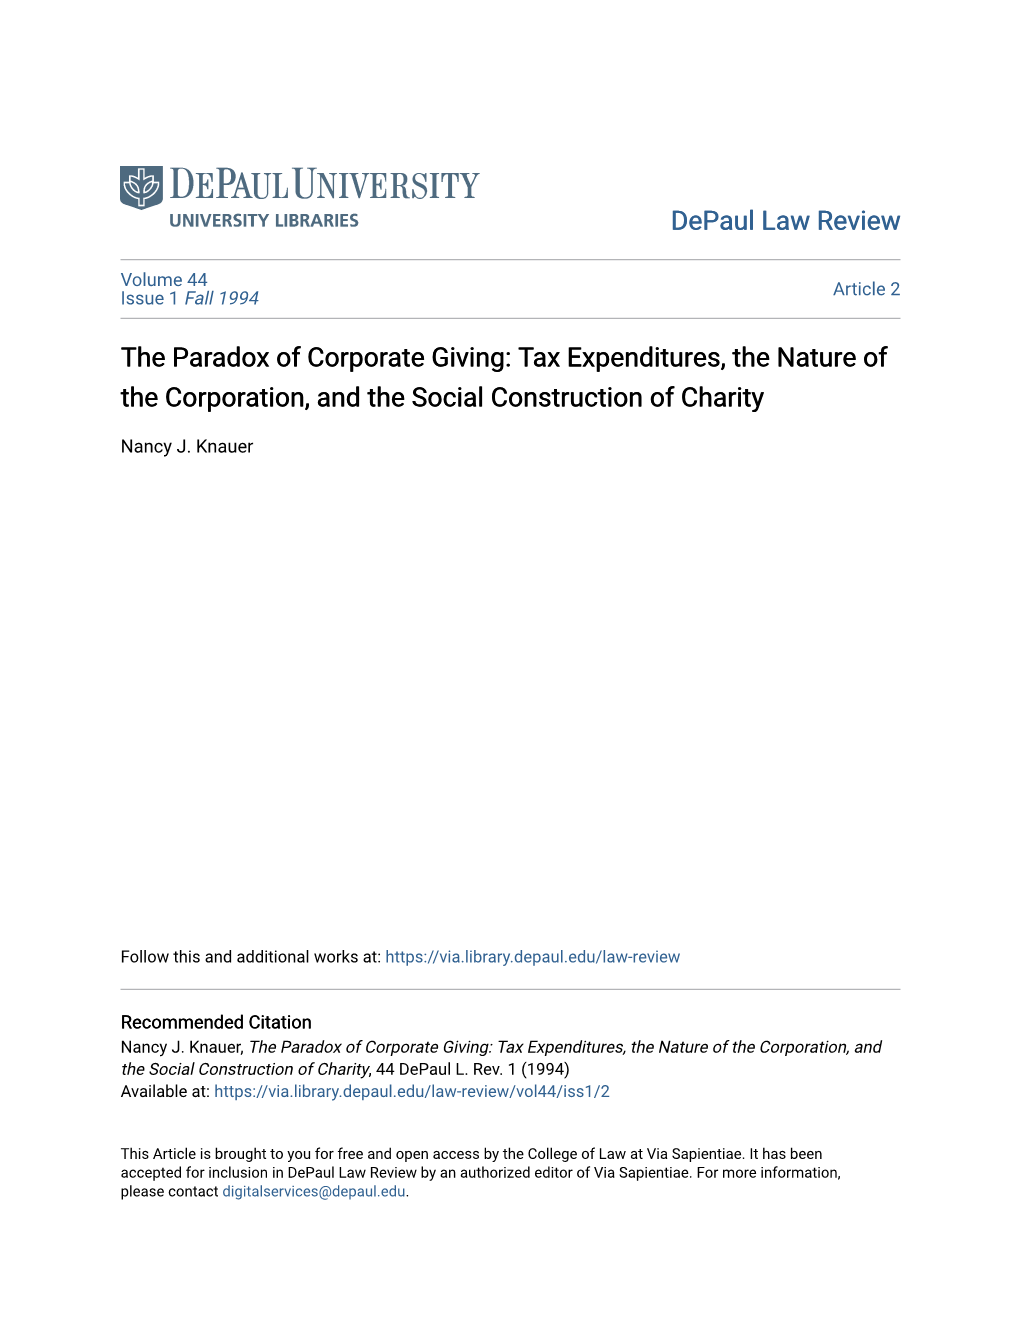 Tax Expenditures, the Nature of the Corporation, and the Social Construction of Charity